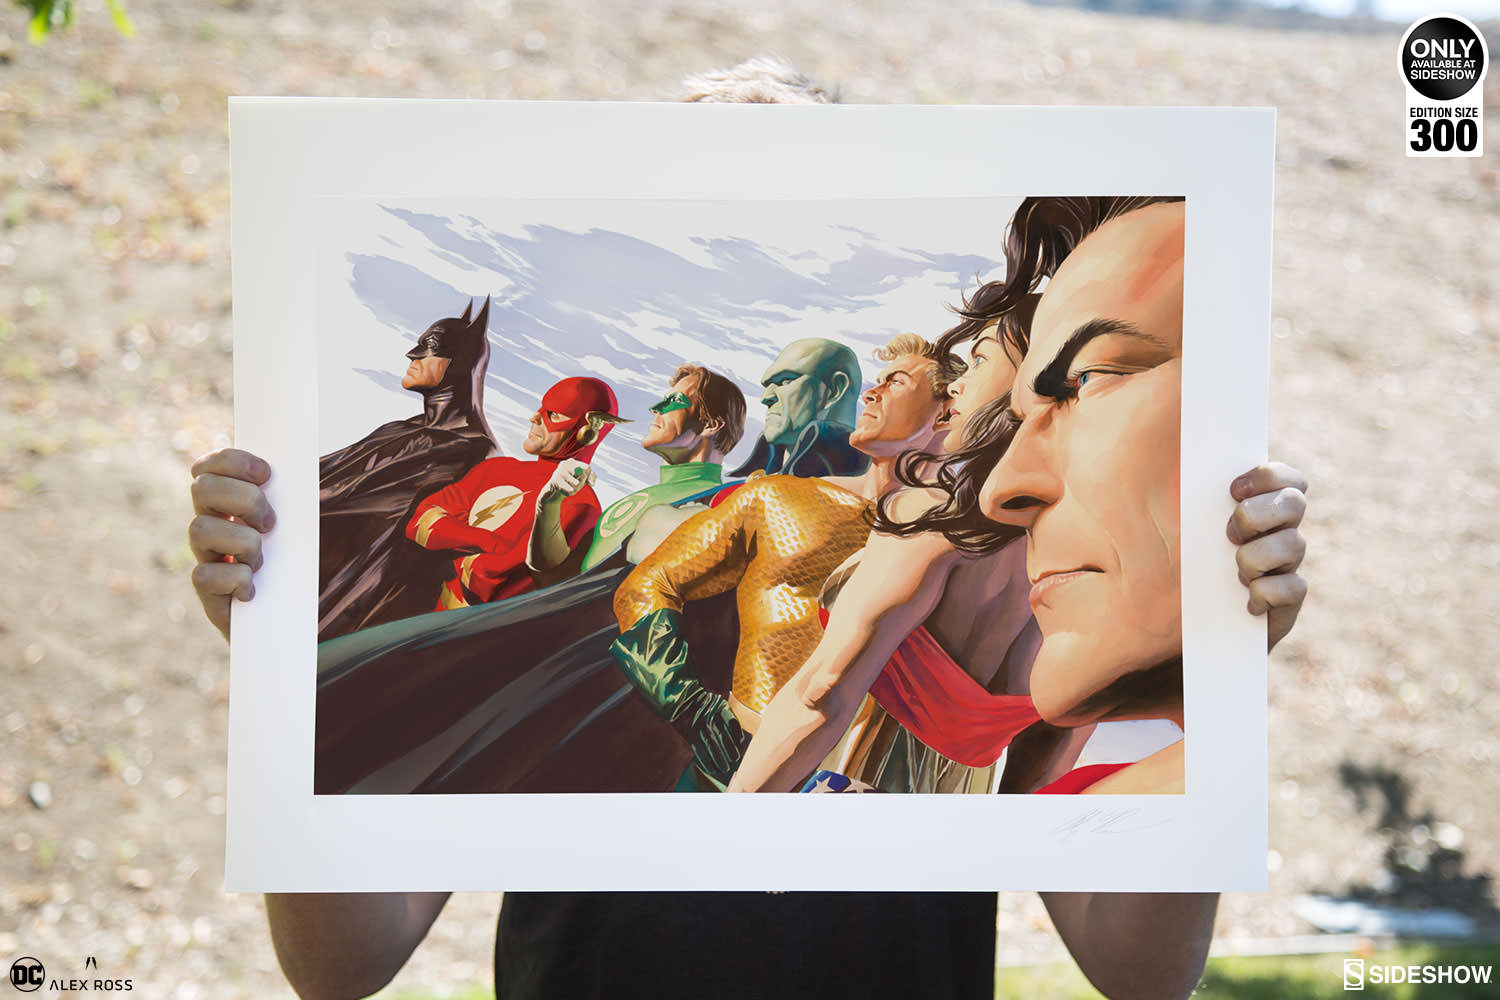 Details about   ALEX ROSS rare THE FLASH Justice 8 print COVER Portfolio Plate LAST ONE